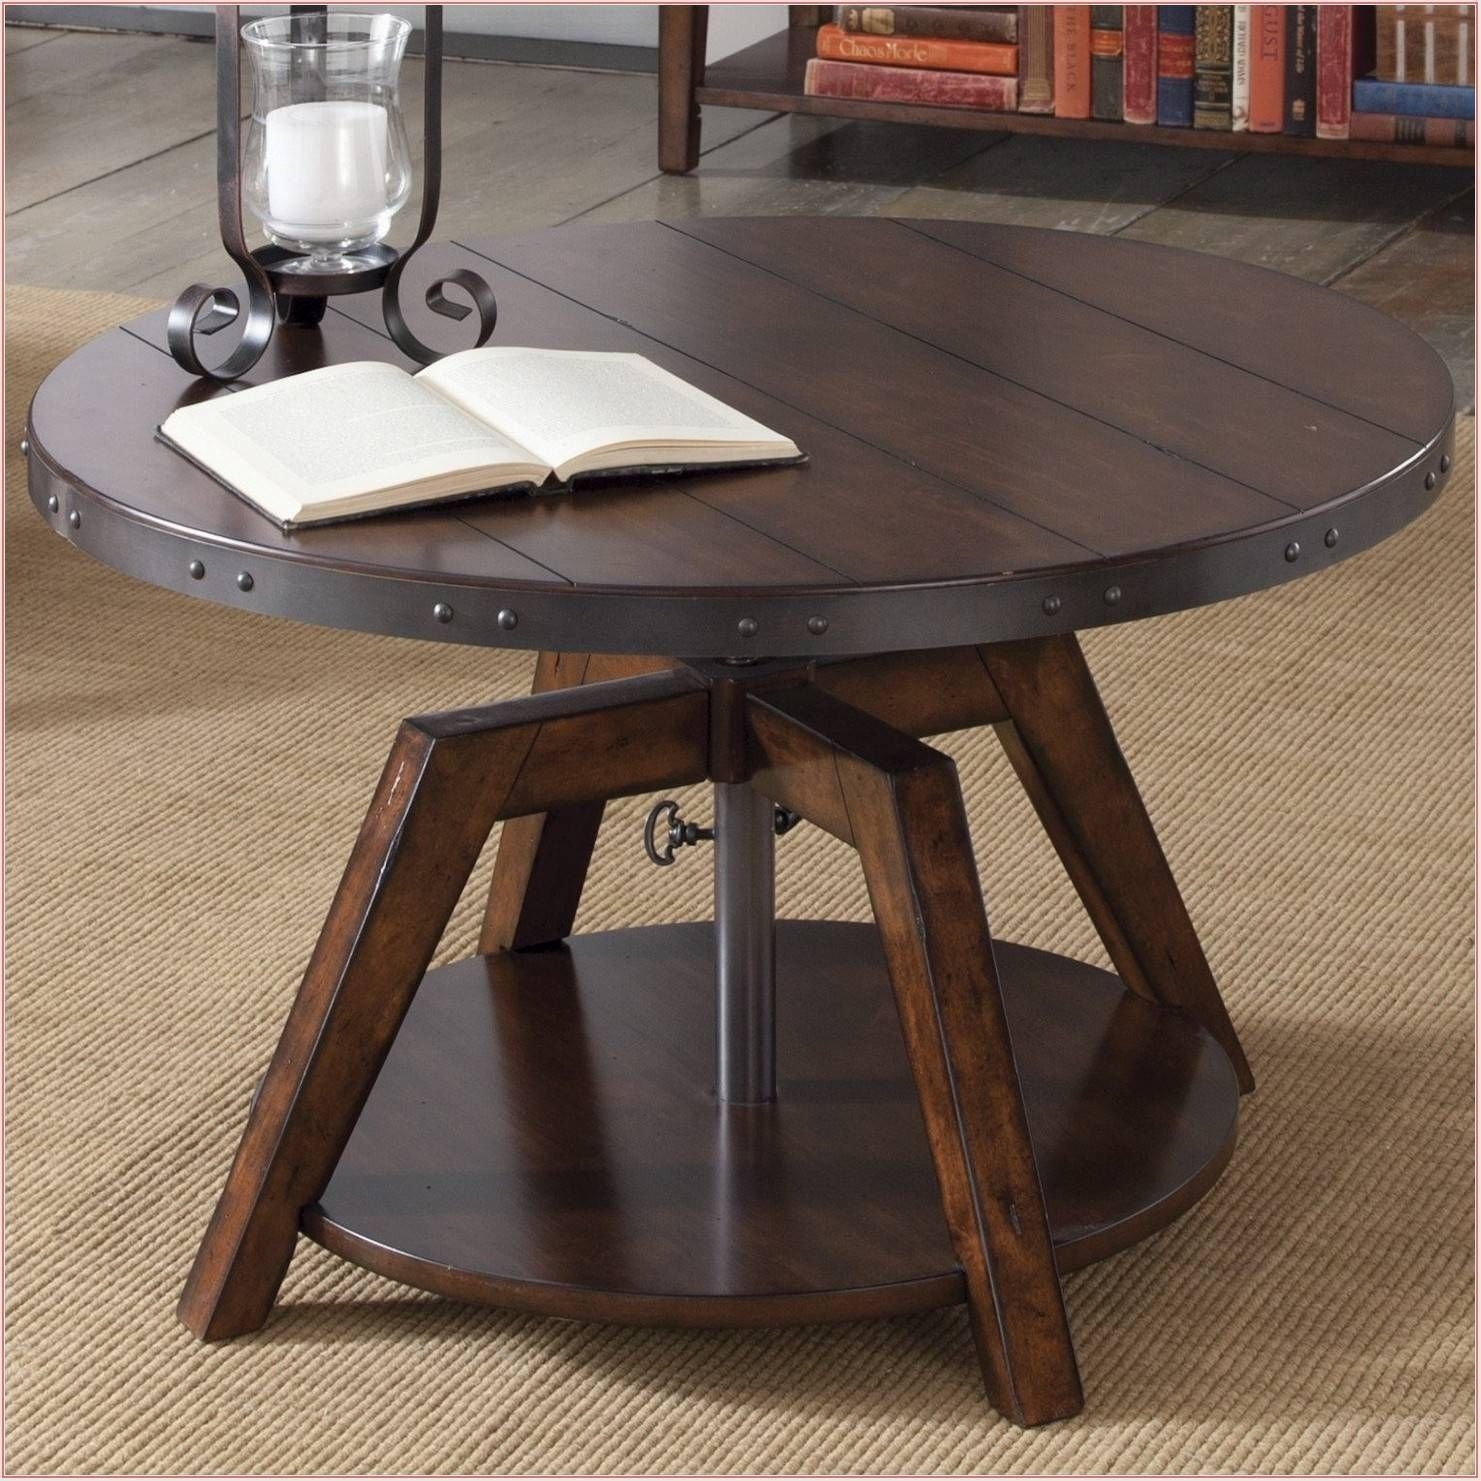 50 Amazing Convertible Coffee Table To Dining Table Up To 70 Off pertaining to sizing 1481 X 1481